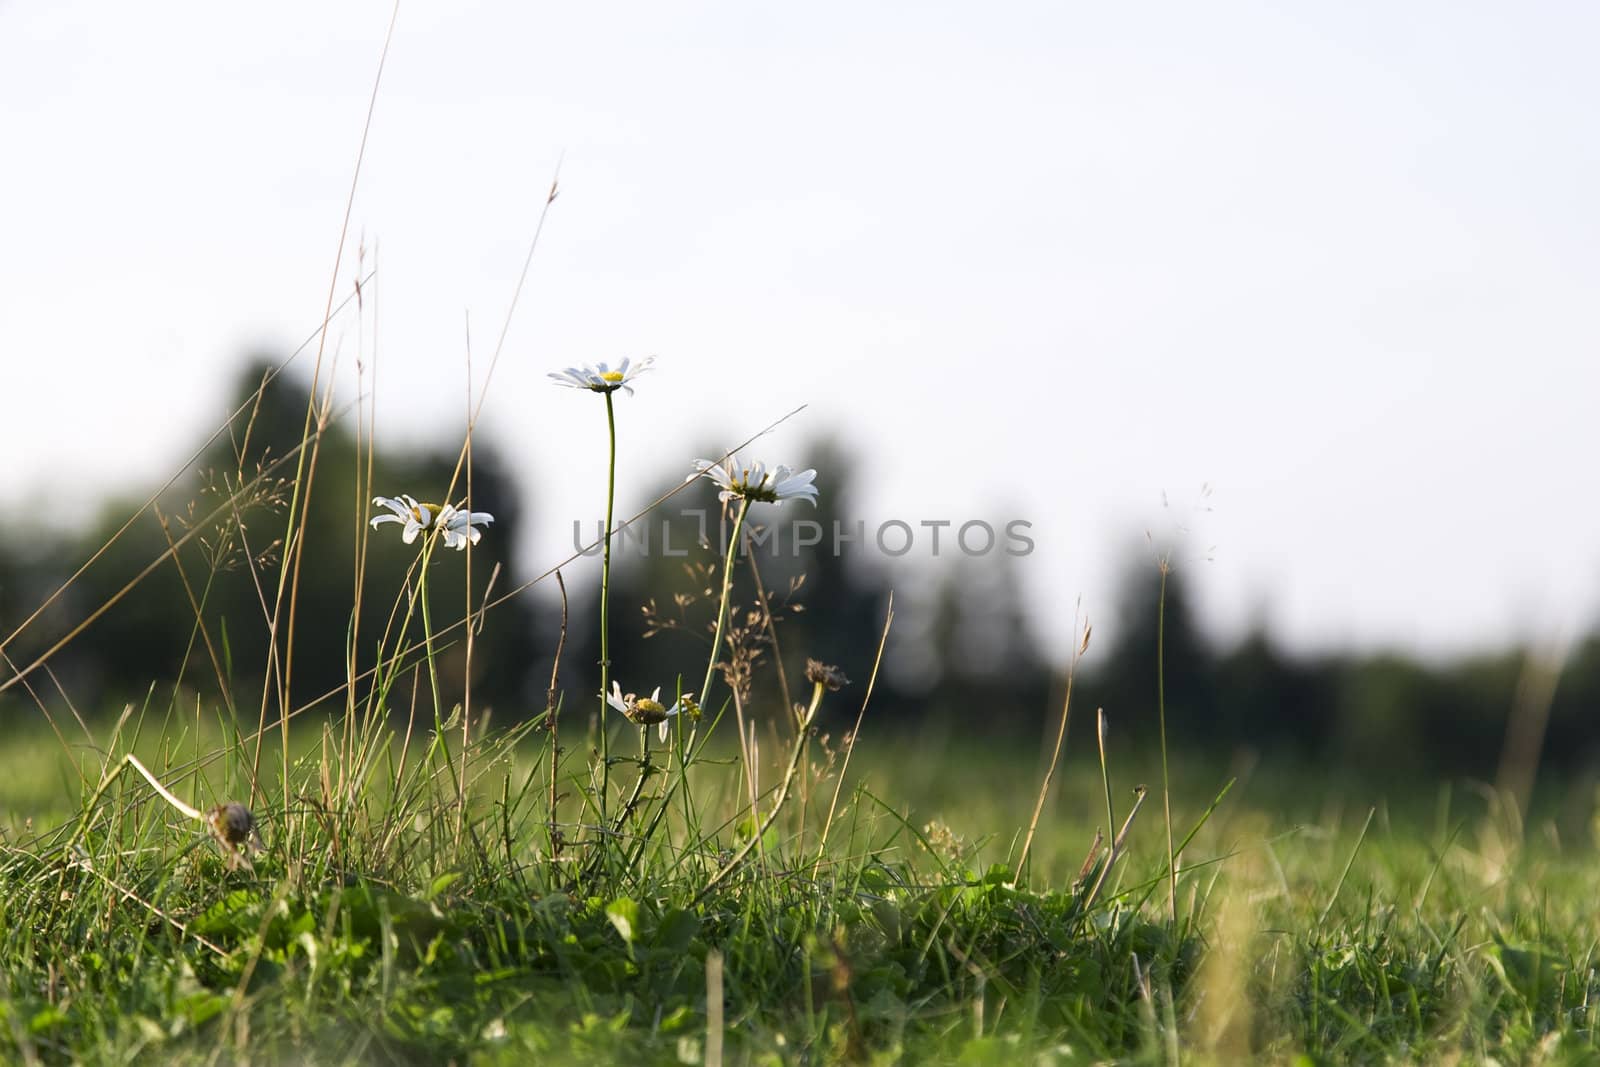 A few daisies in a field trying there best to survive